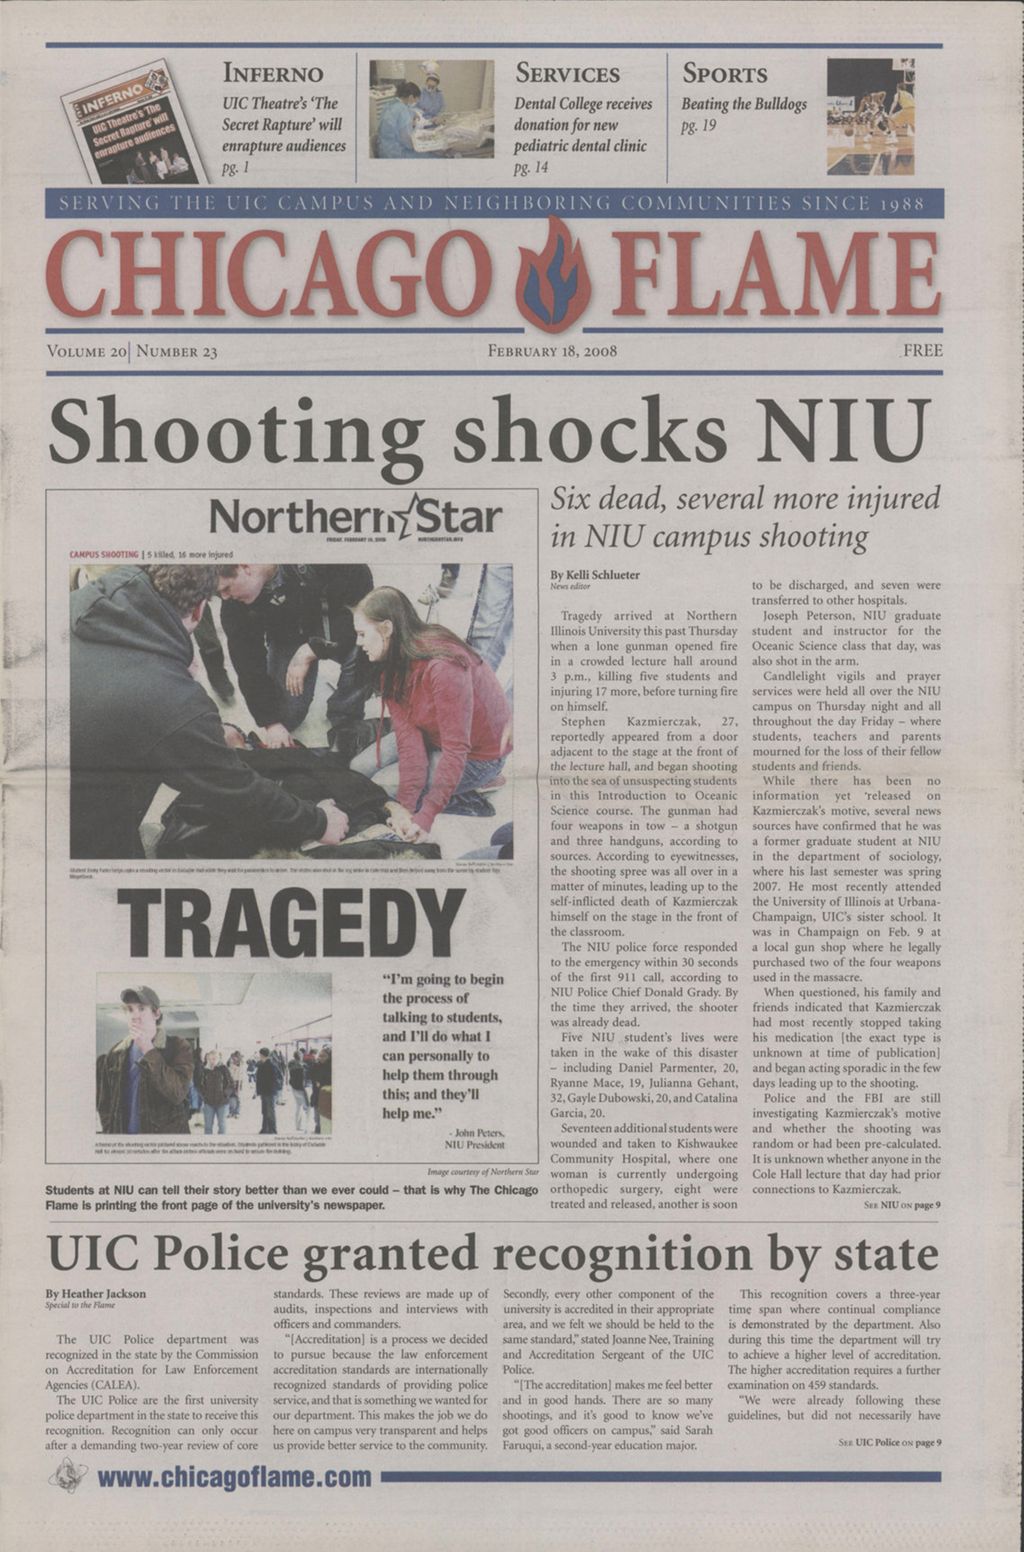 Chicago Flame (February 18, 2008)